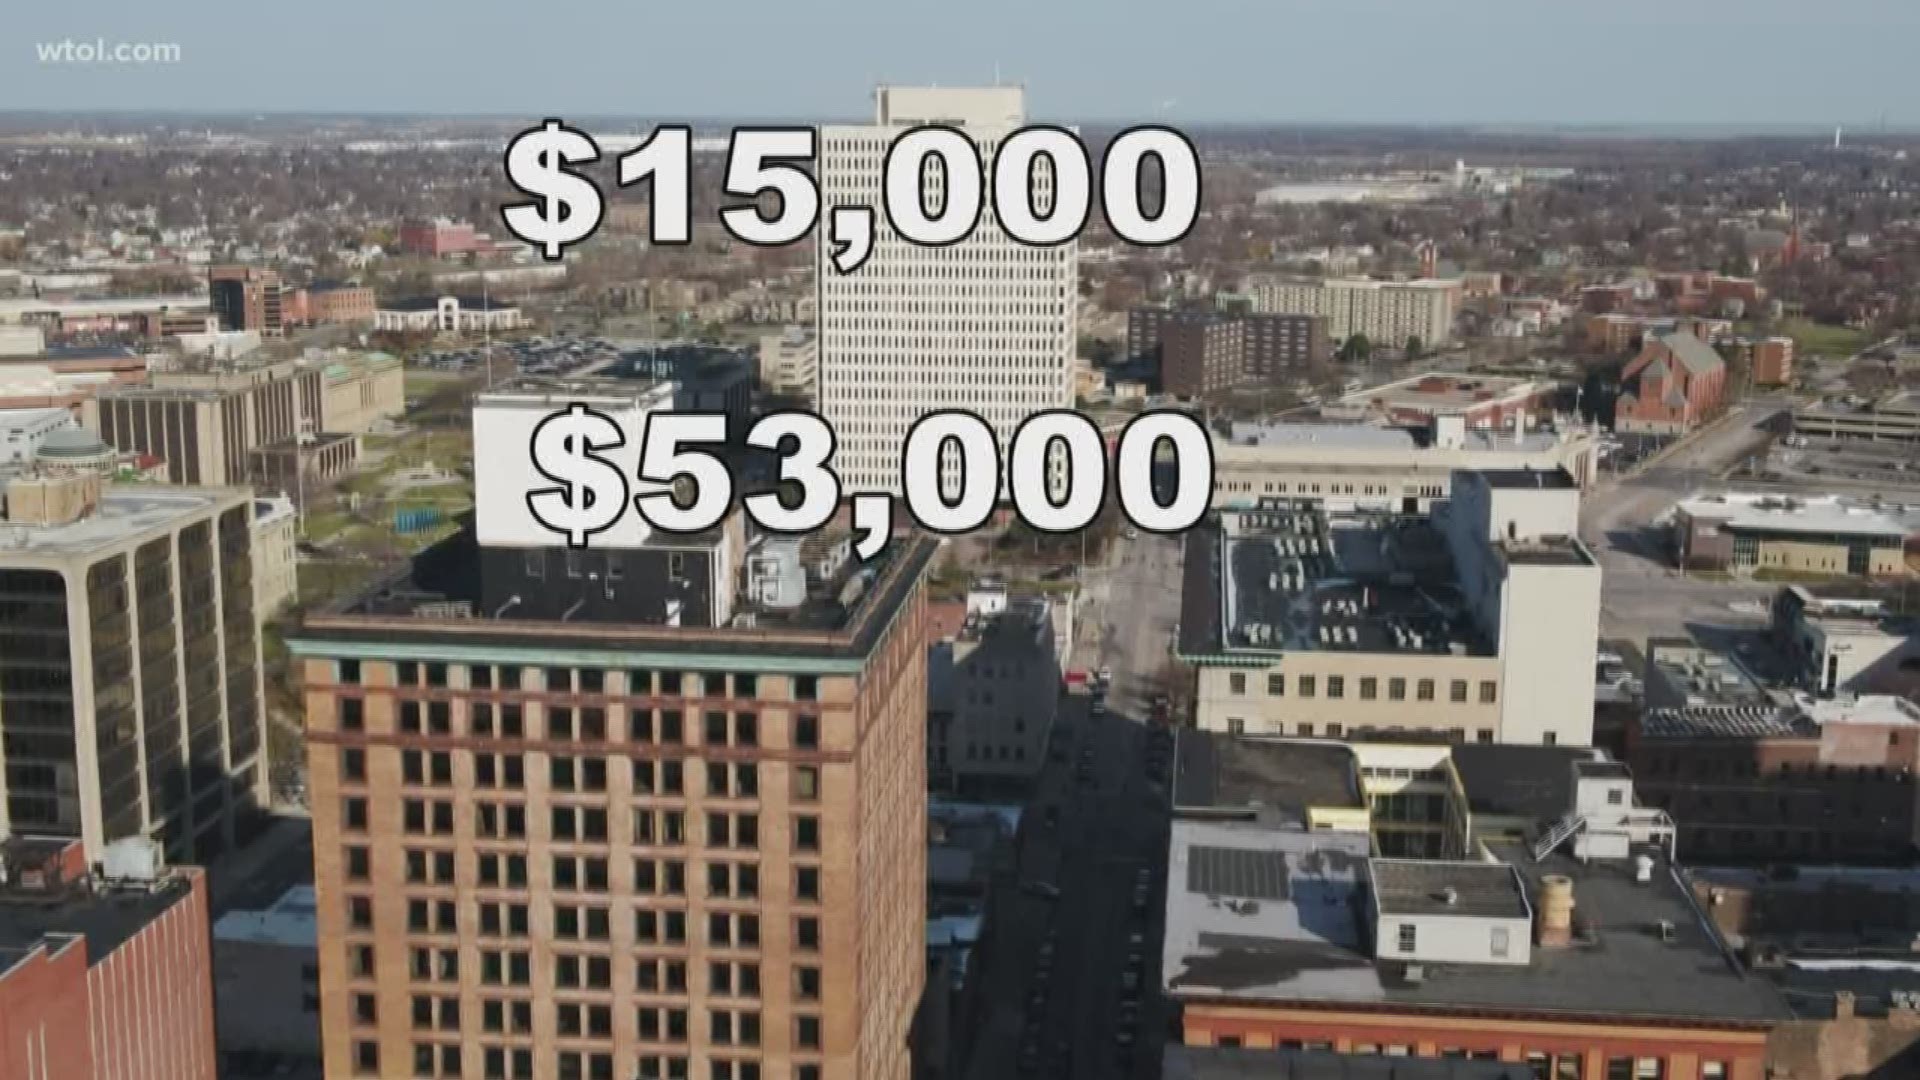 The Huntington Center will keep 100% of all revenues generated in connection with parking lot fees and sale of food and beverages during the rally.